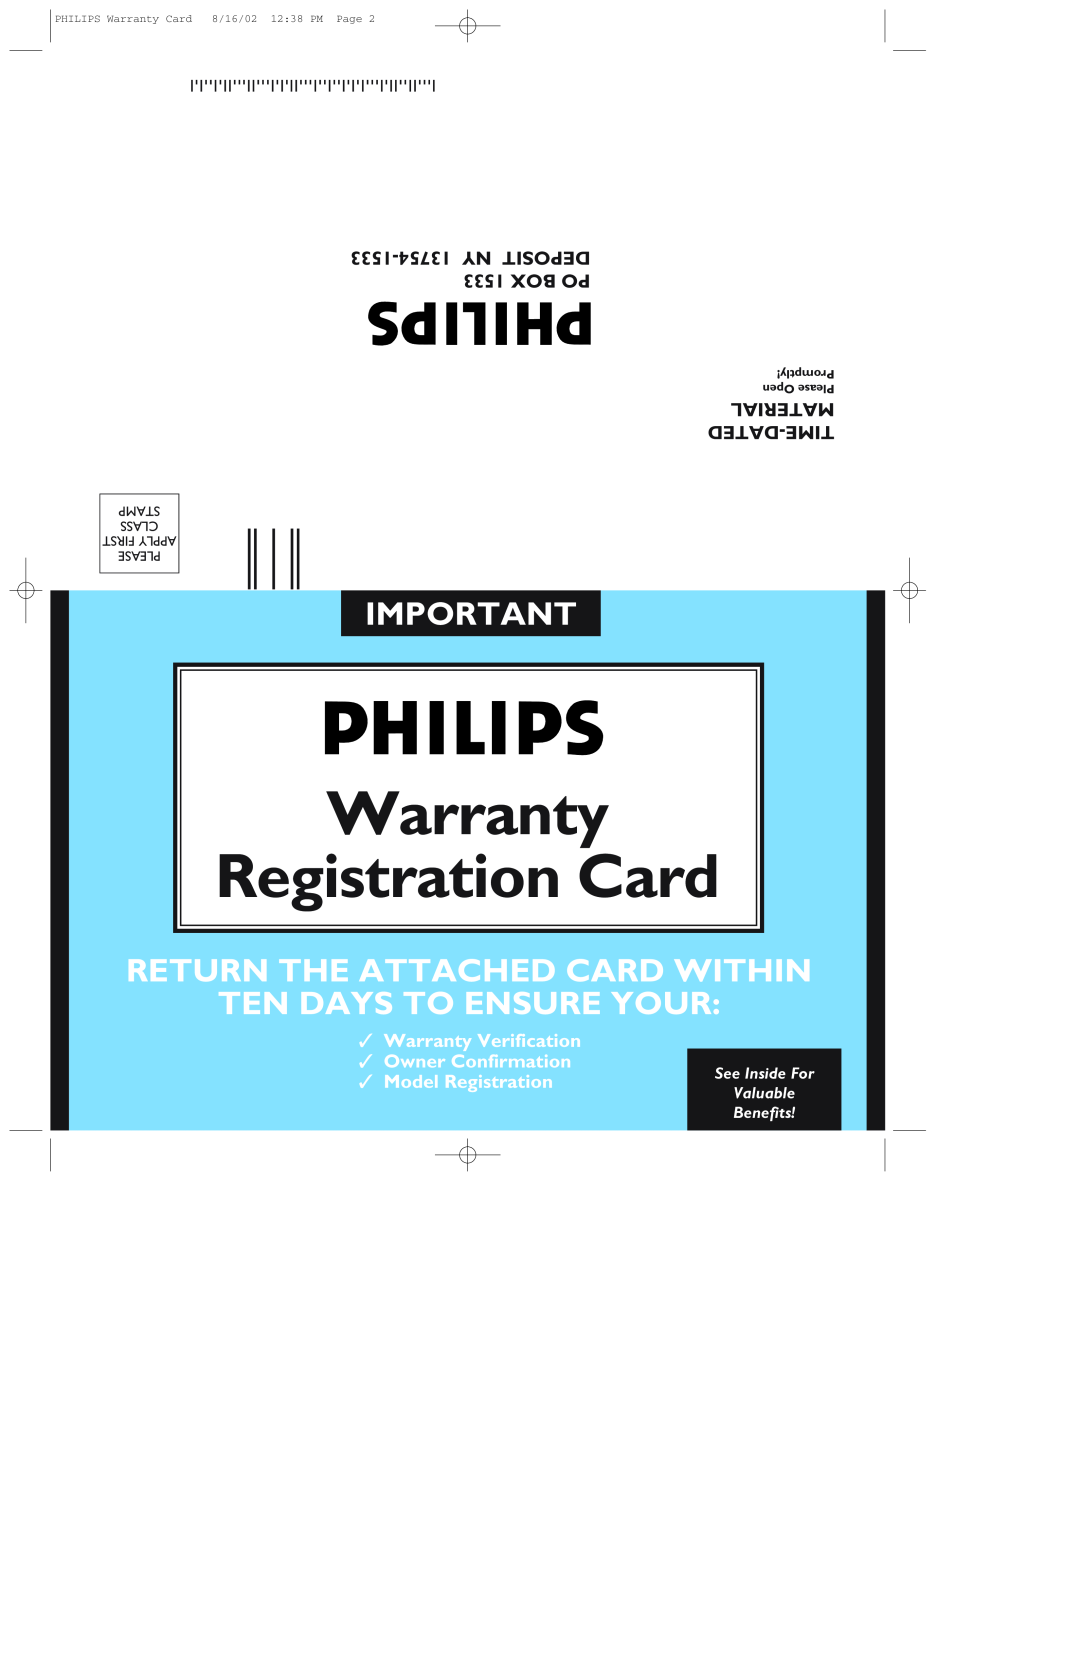 Philips 200WP7 Warranty, Registration Card, Return The Attached Card Within Ten Days To Ensure Your, Ny Deposit, Box Po 